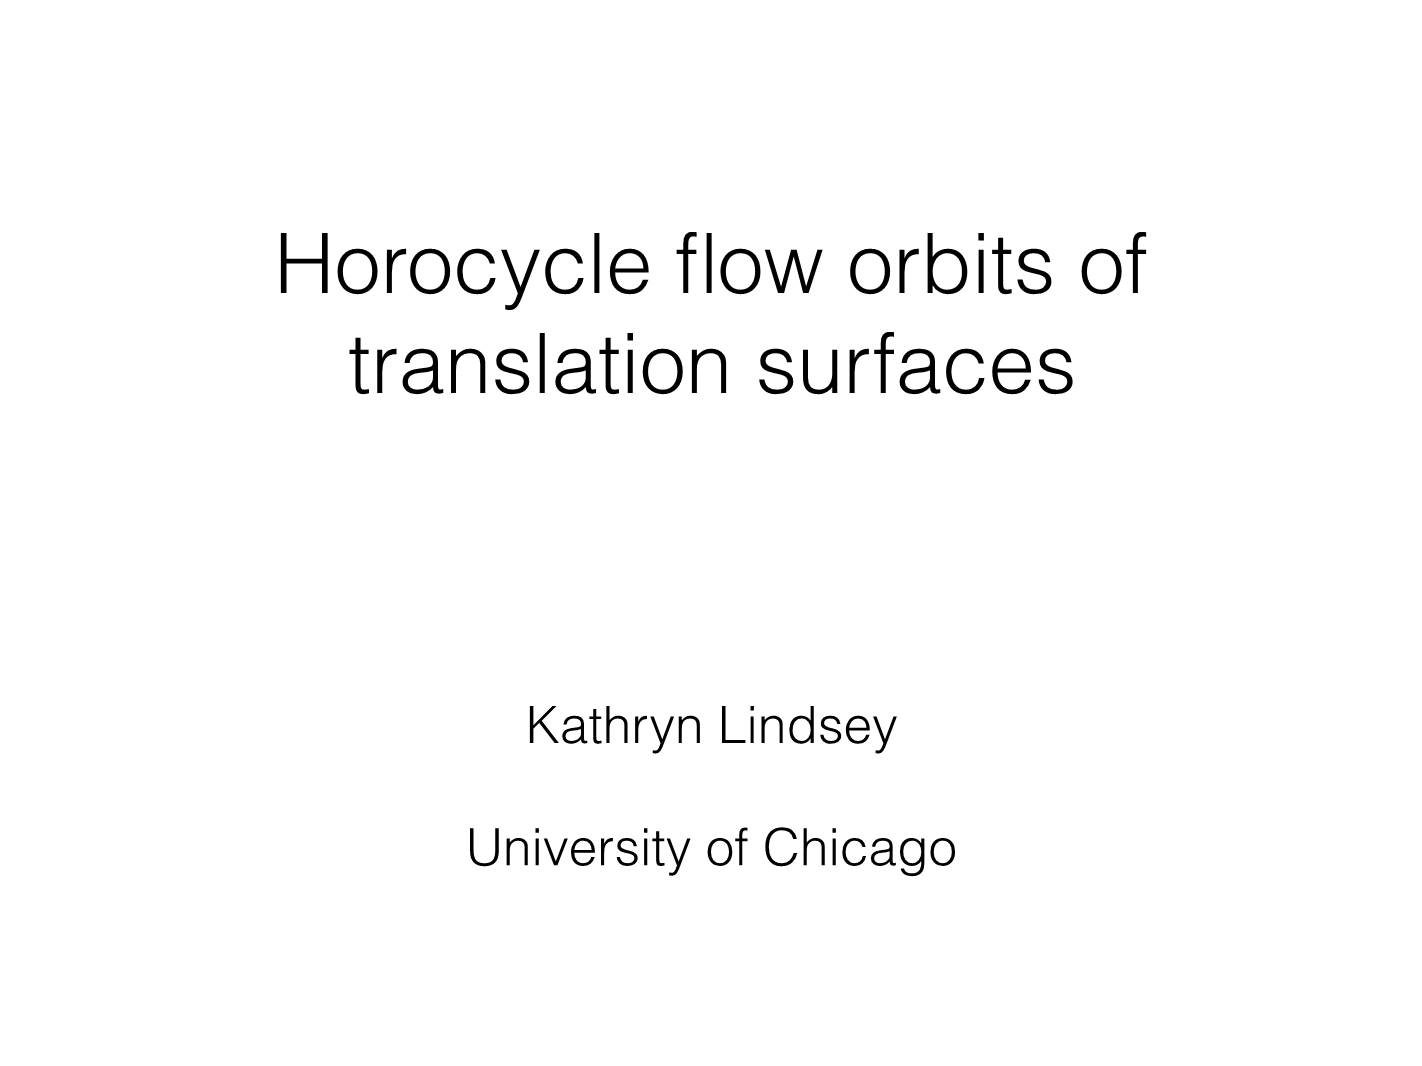 Horocycle Flow Orbits of Translation Surfaces